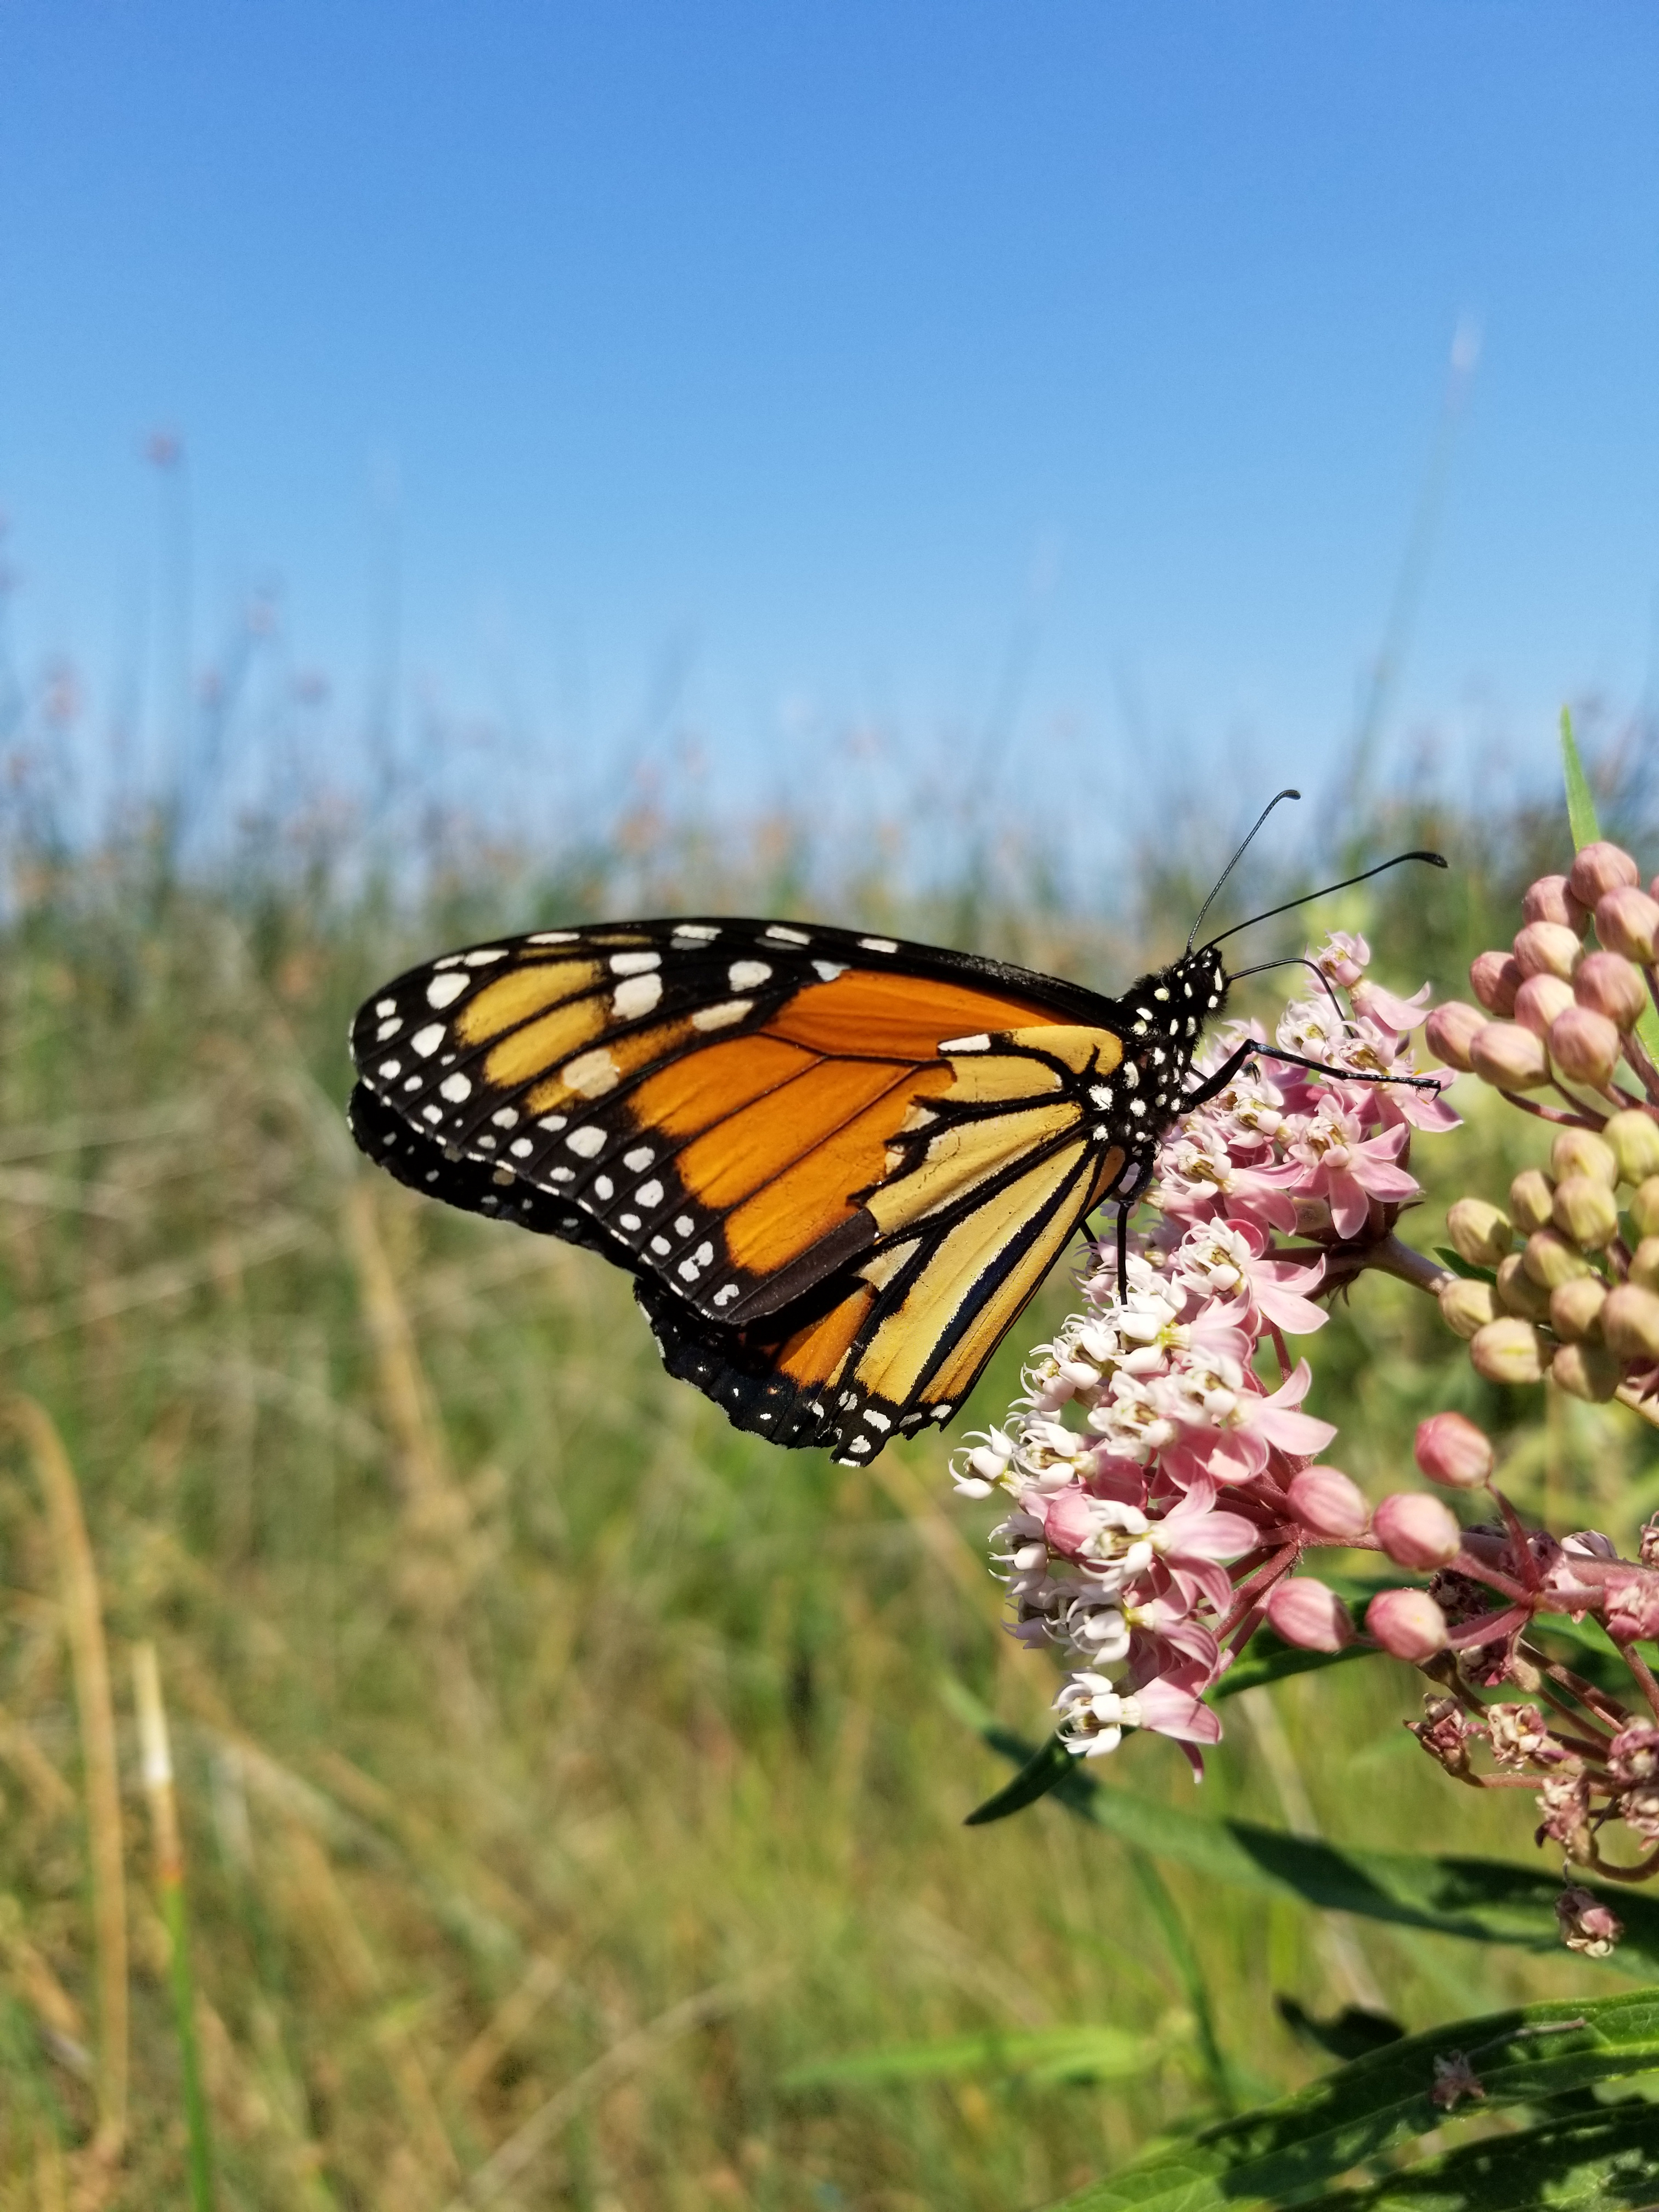 An orange monarch with a partially torn wing clutches a bright pink cluster of milkweed flowers, with an arid landscape and blue sky in the background.